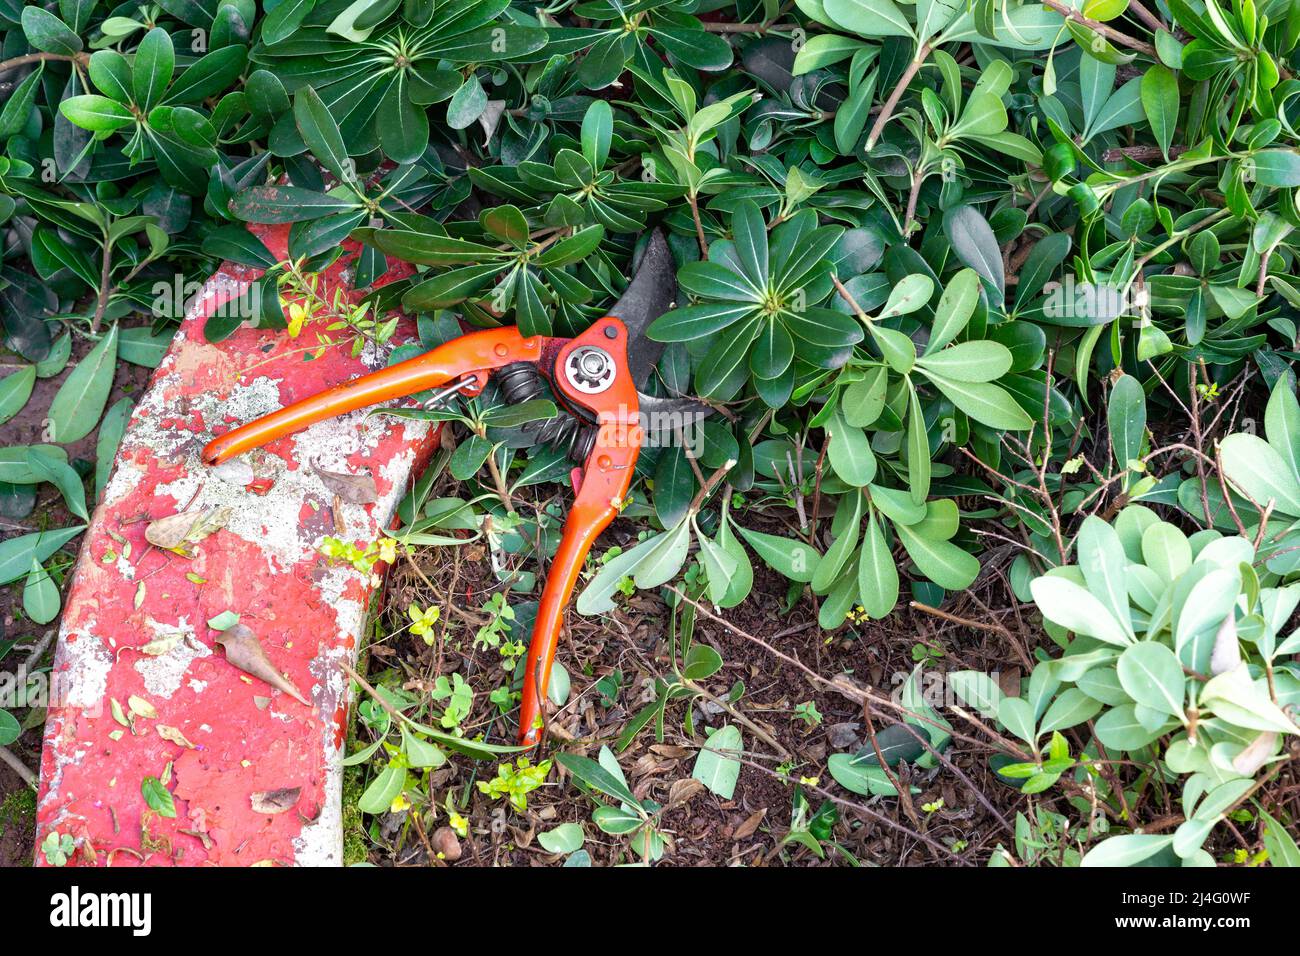 Orange colored secateurs on the ground among the pruned branches in the garden. Spring, gardening, agriculture concept. Stock Photo